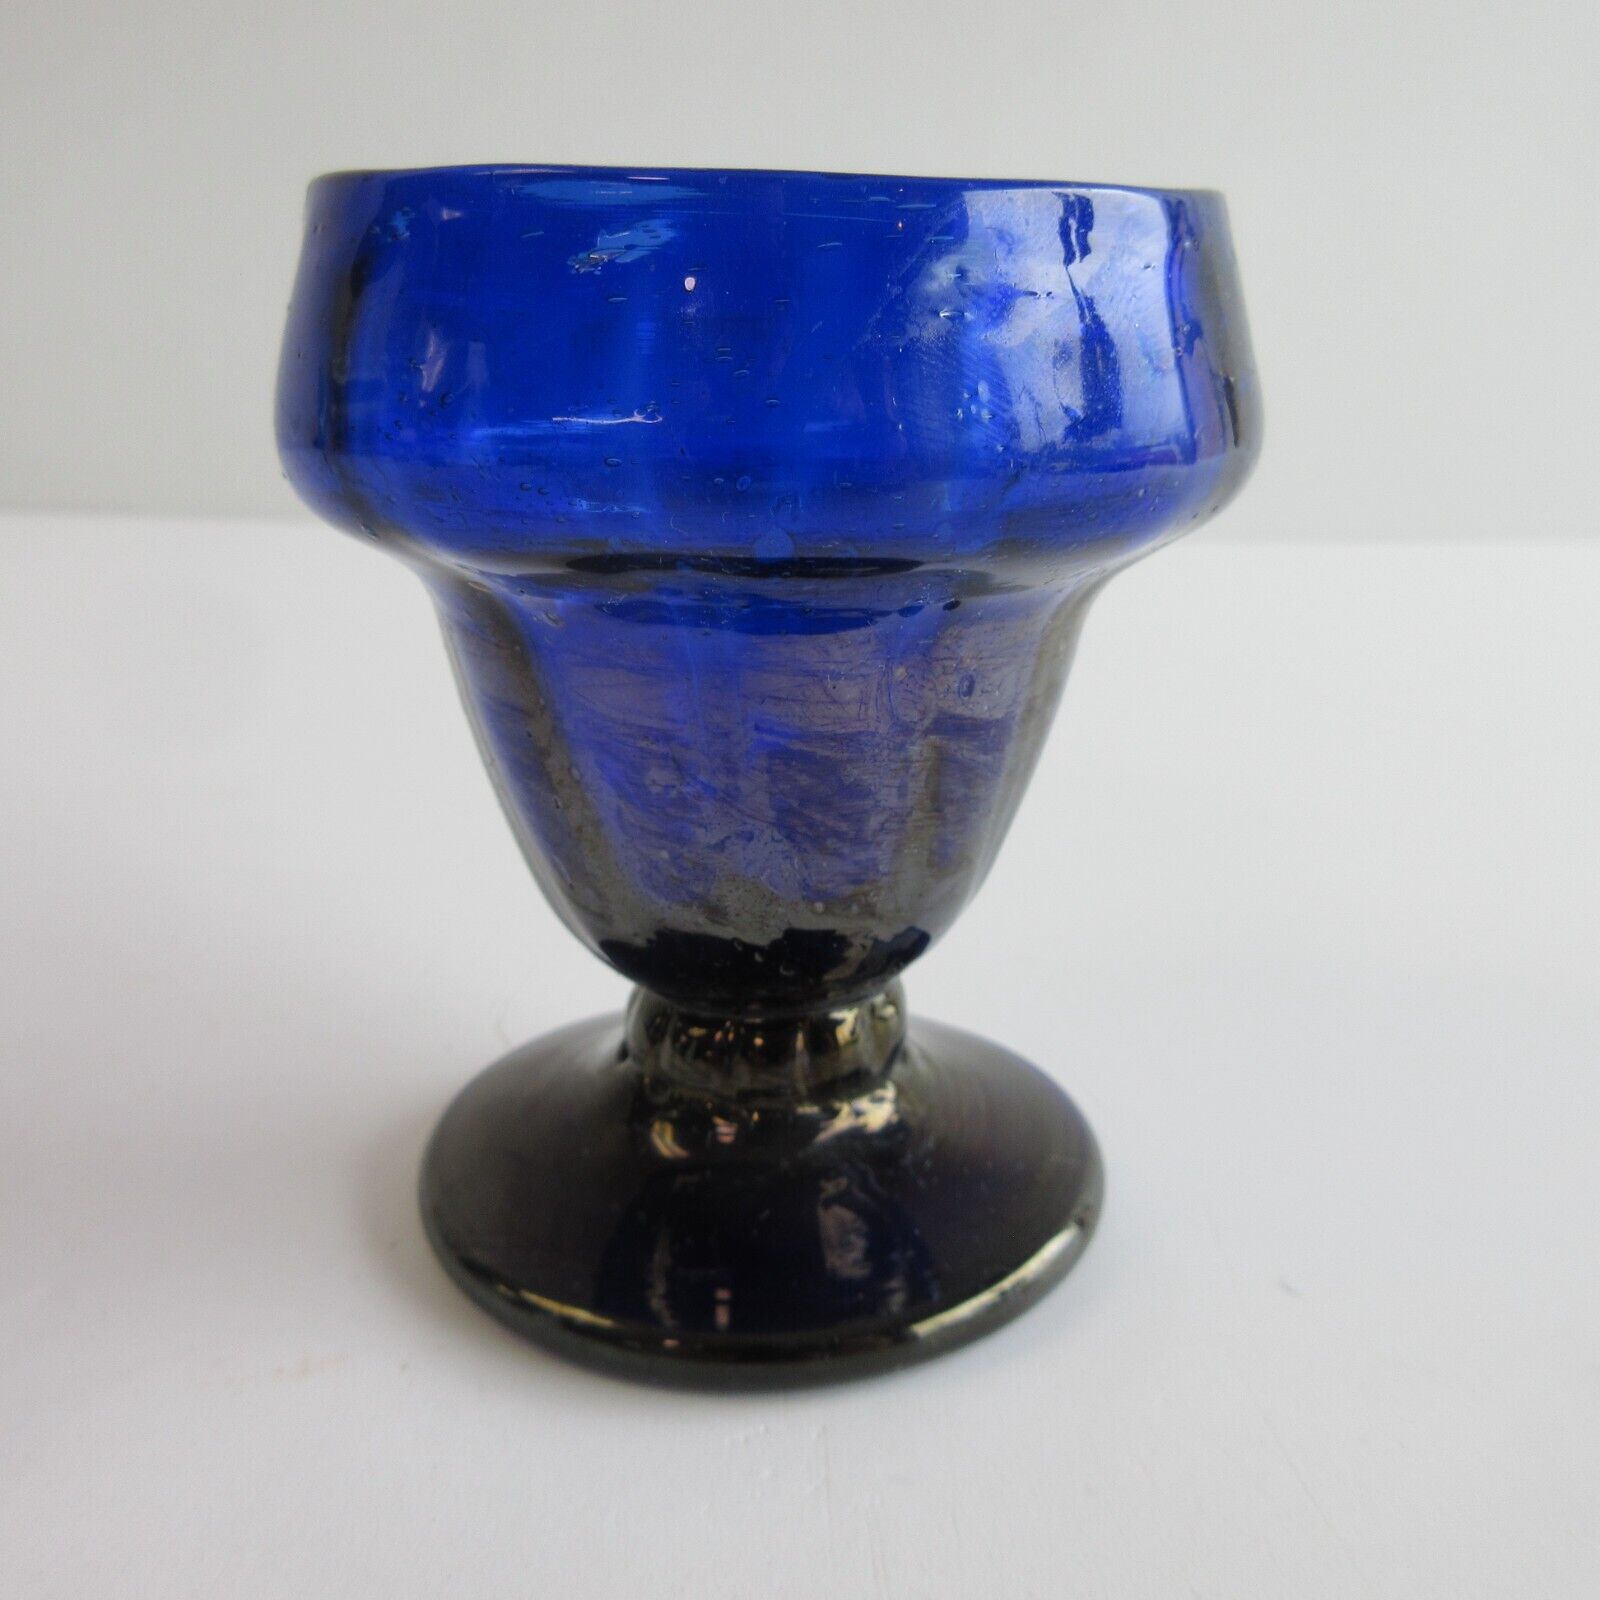 Antique Rare Blown Glass Blue Crude Footed Master Salt Cellar Pontil Early Glass